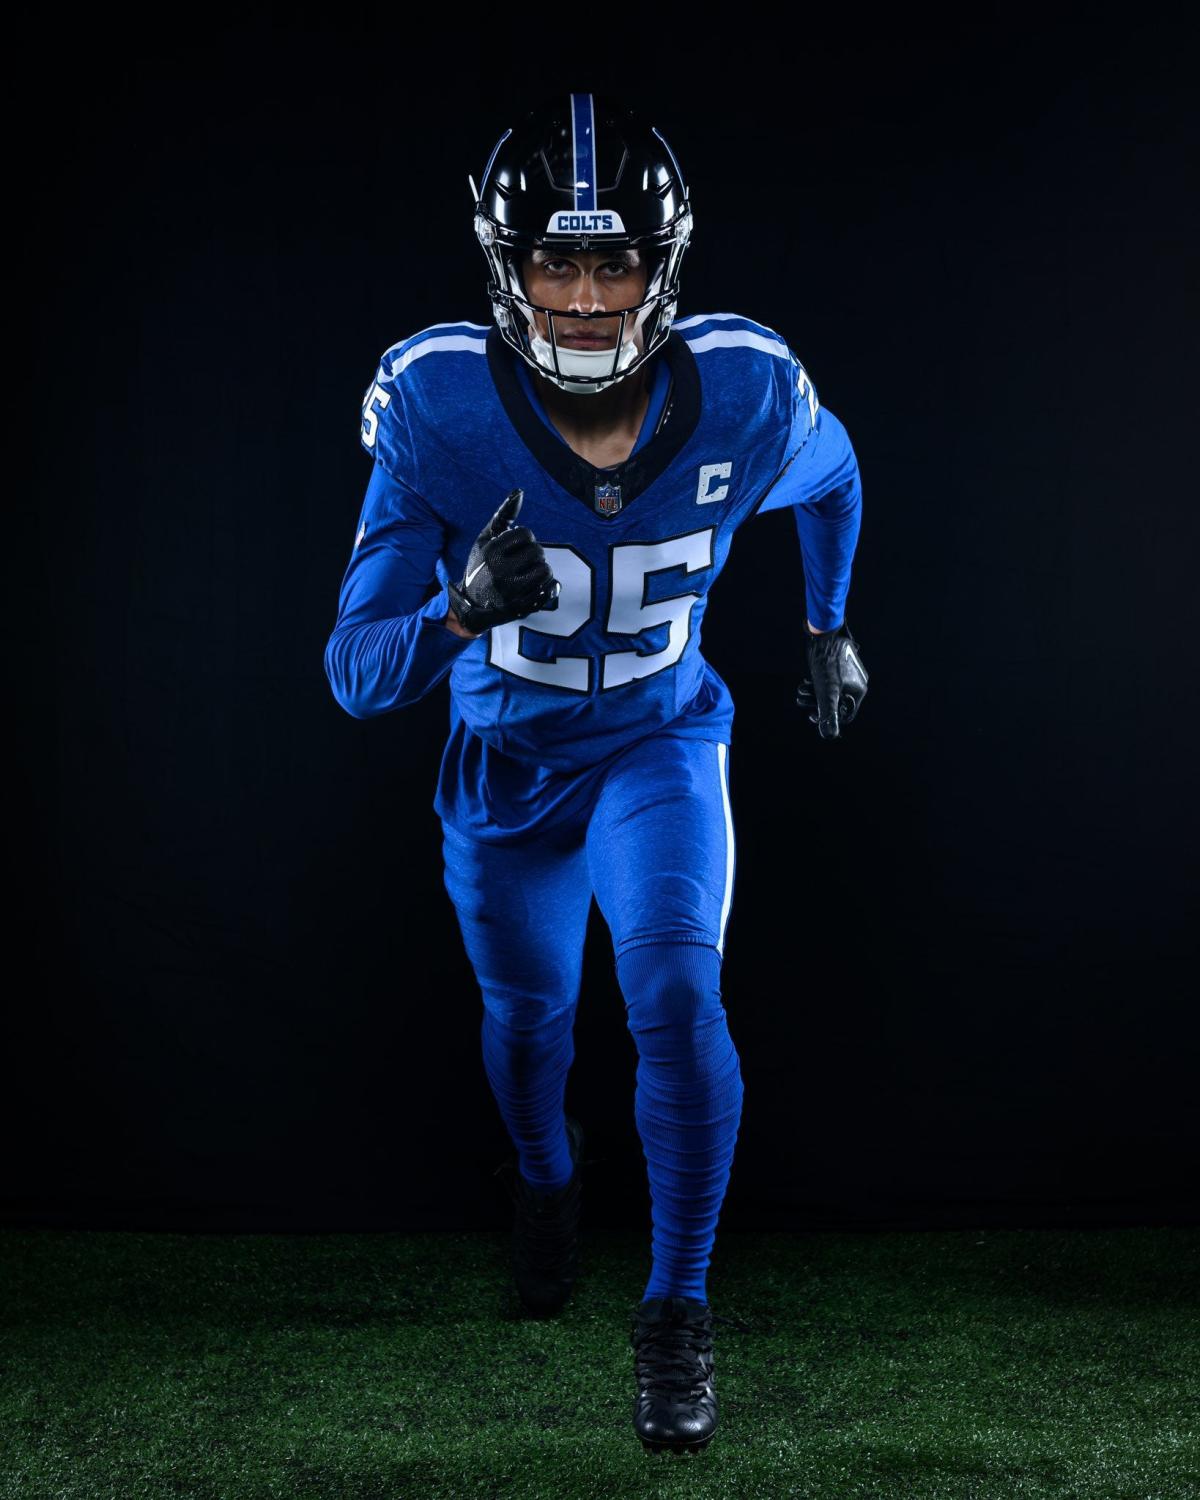 'The blue is beautiful' Twitter has some thoughts on the new Colts